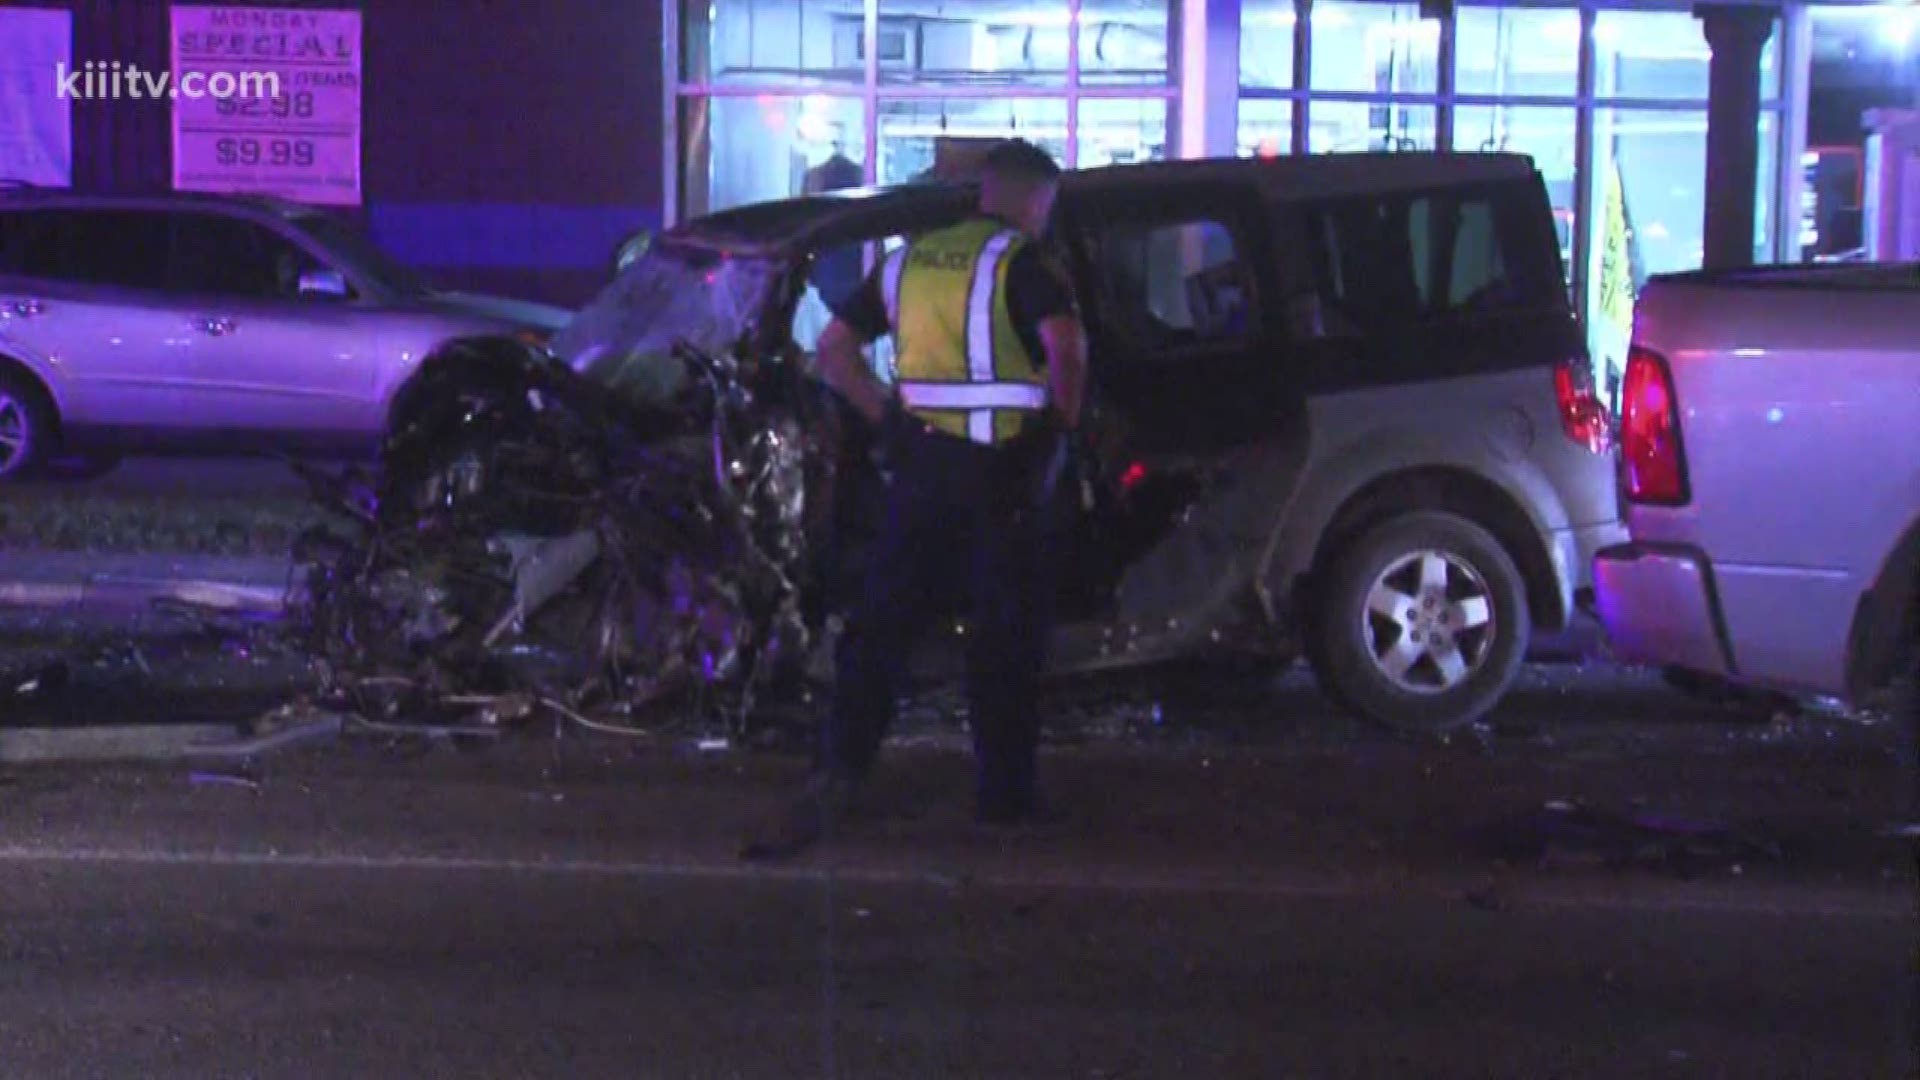 Around 3 a.m. on Sunday officers responded to a crash at Holly and Everhart in south Corpus Christi.